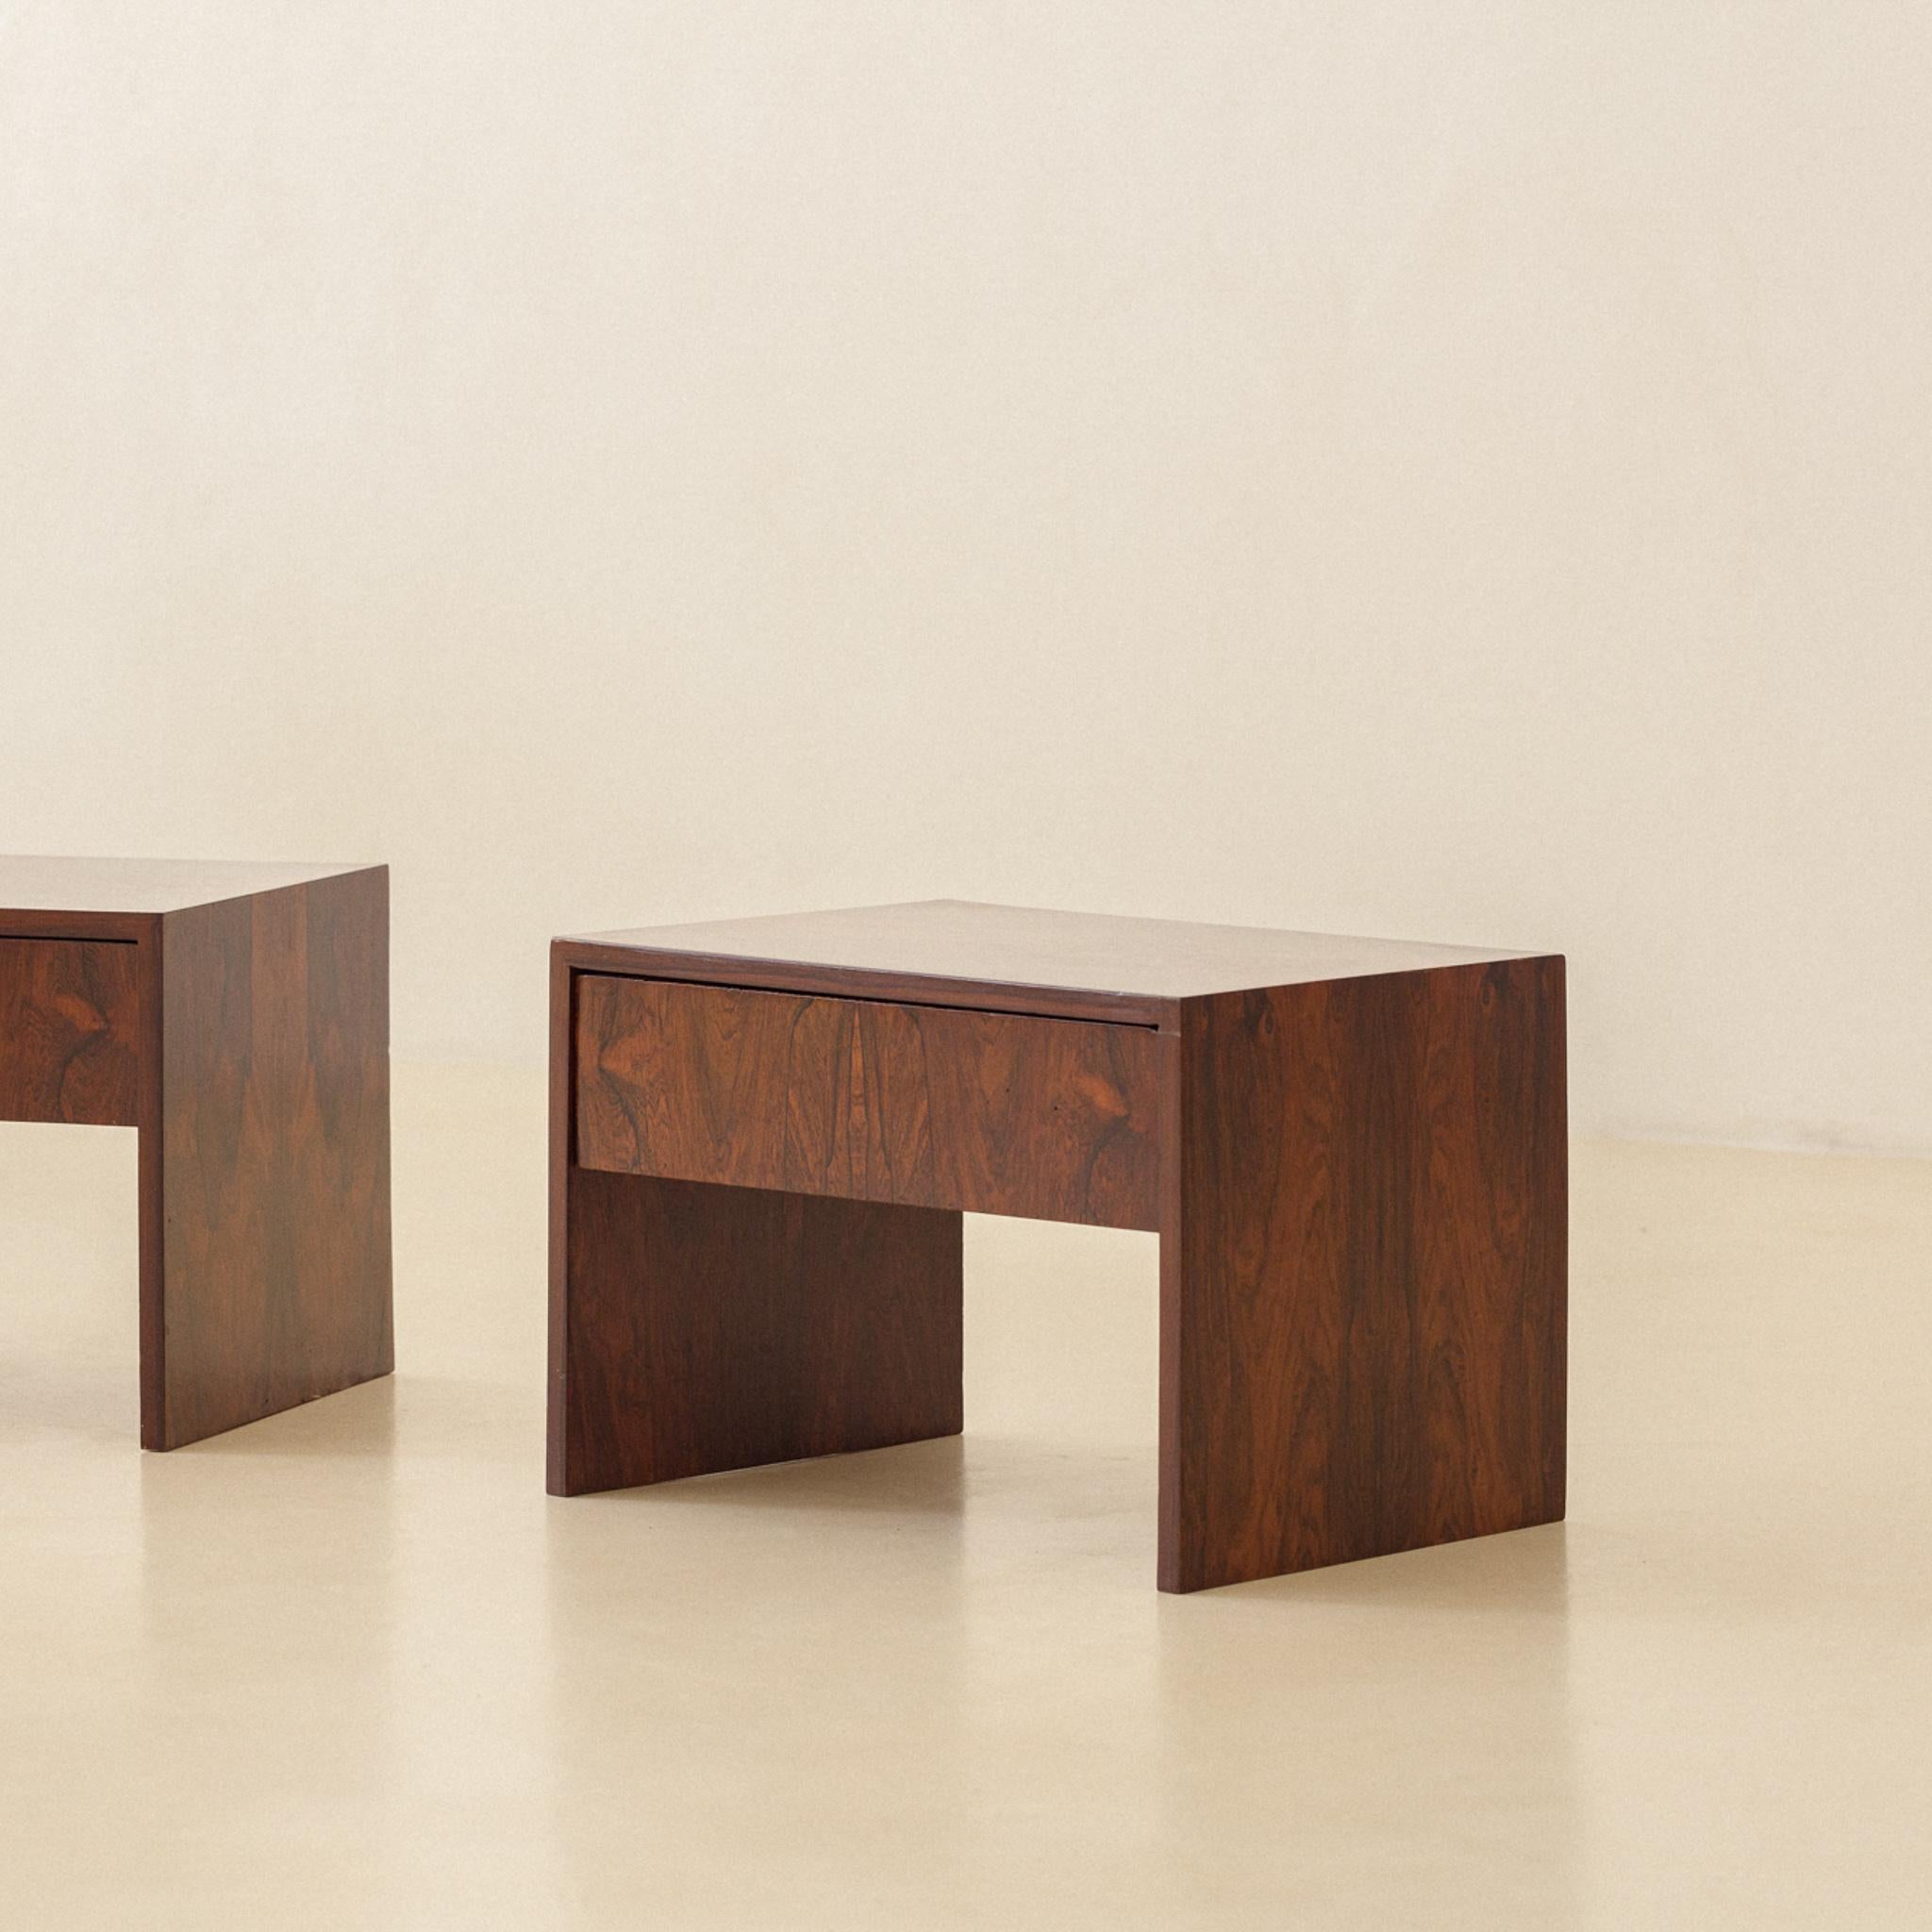 Pair of Rosewood Nightstands by Unknown Designer, 1960s, Brazilian Midcentury For Sale 5